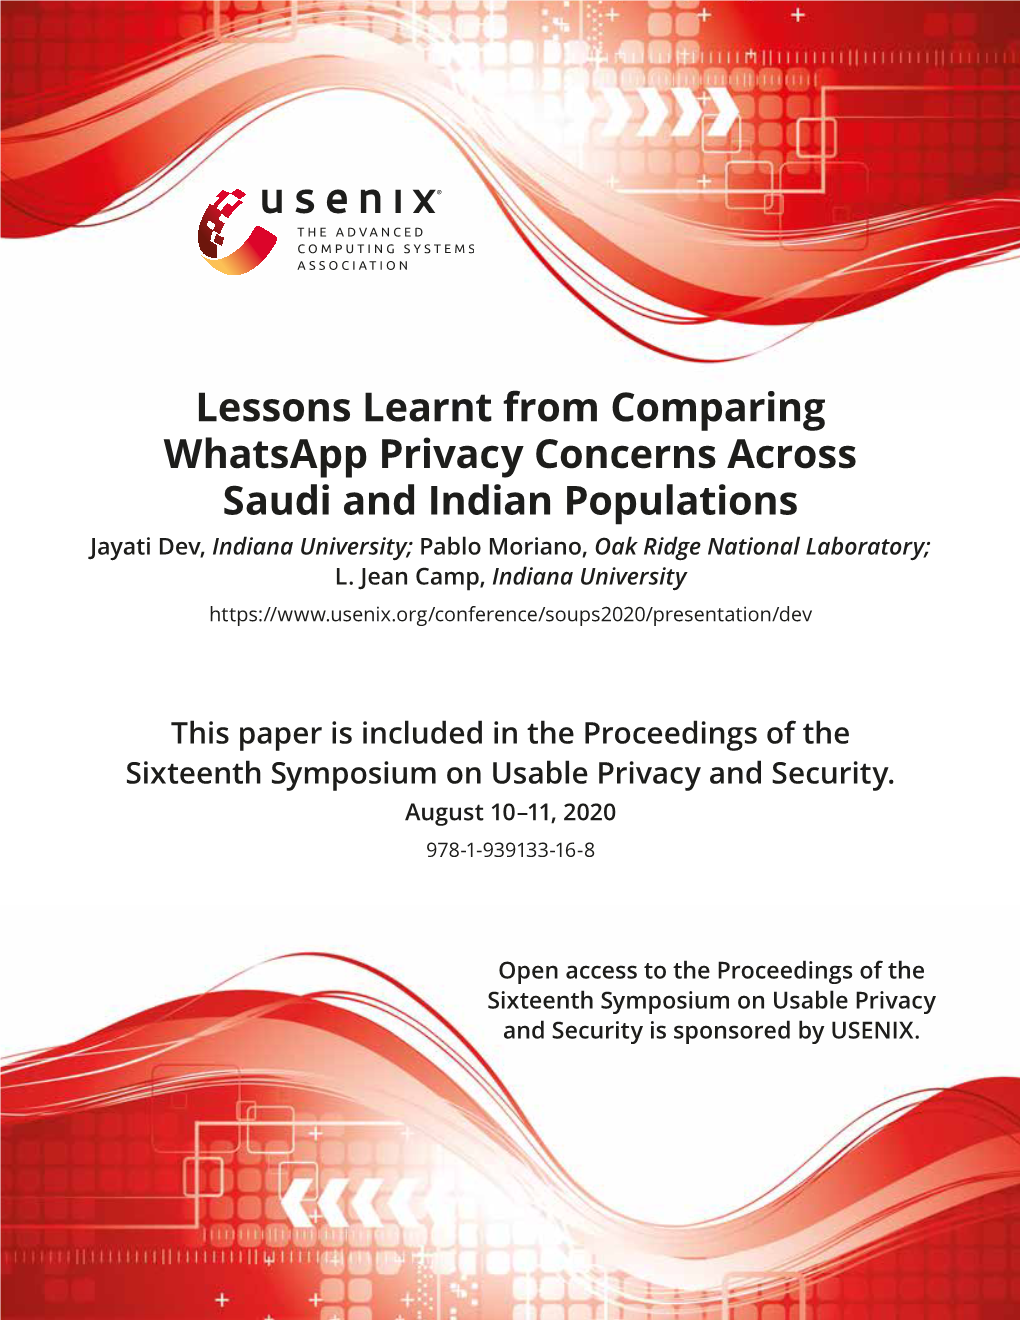 Lessons Learnt from Comparing Whatsapp Privacy Concerns Across